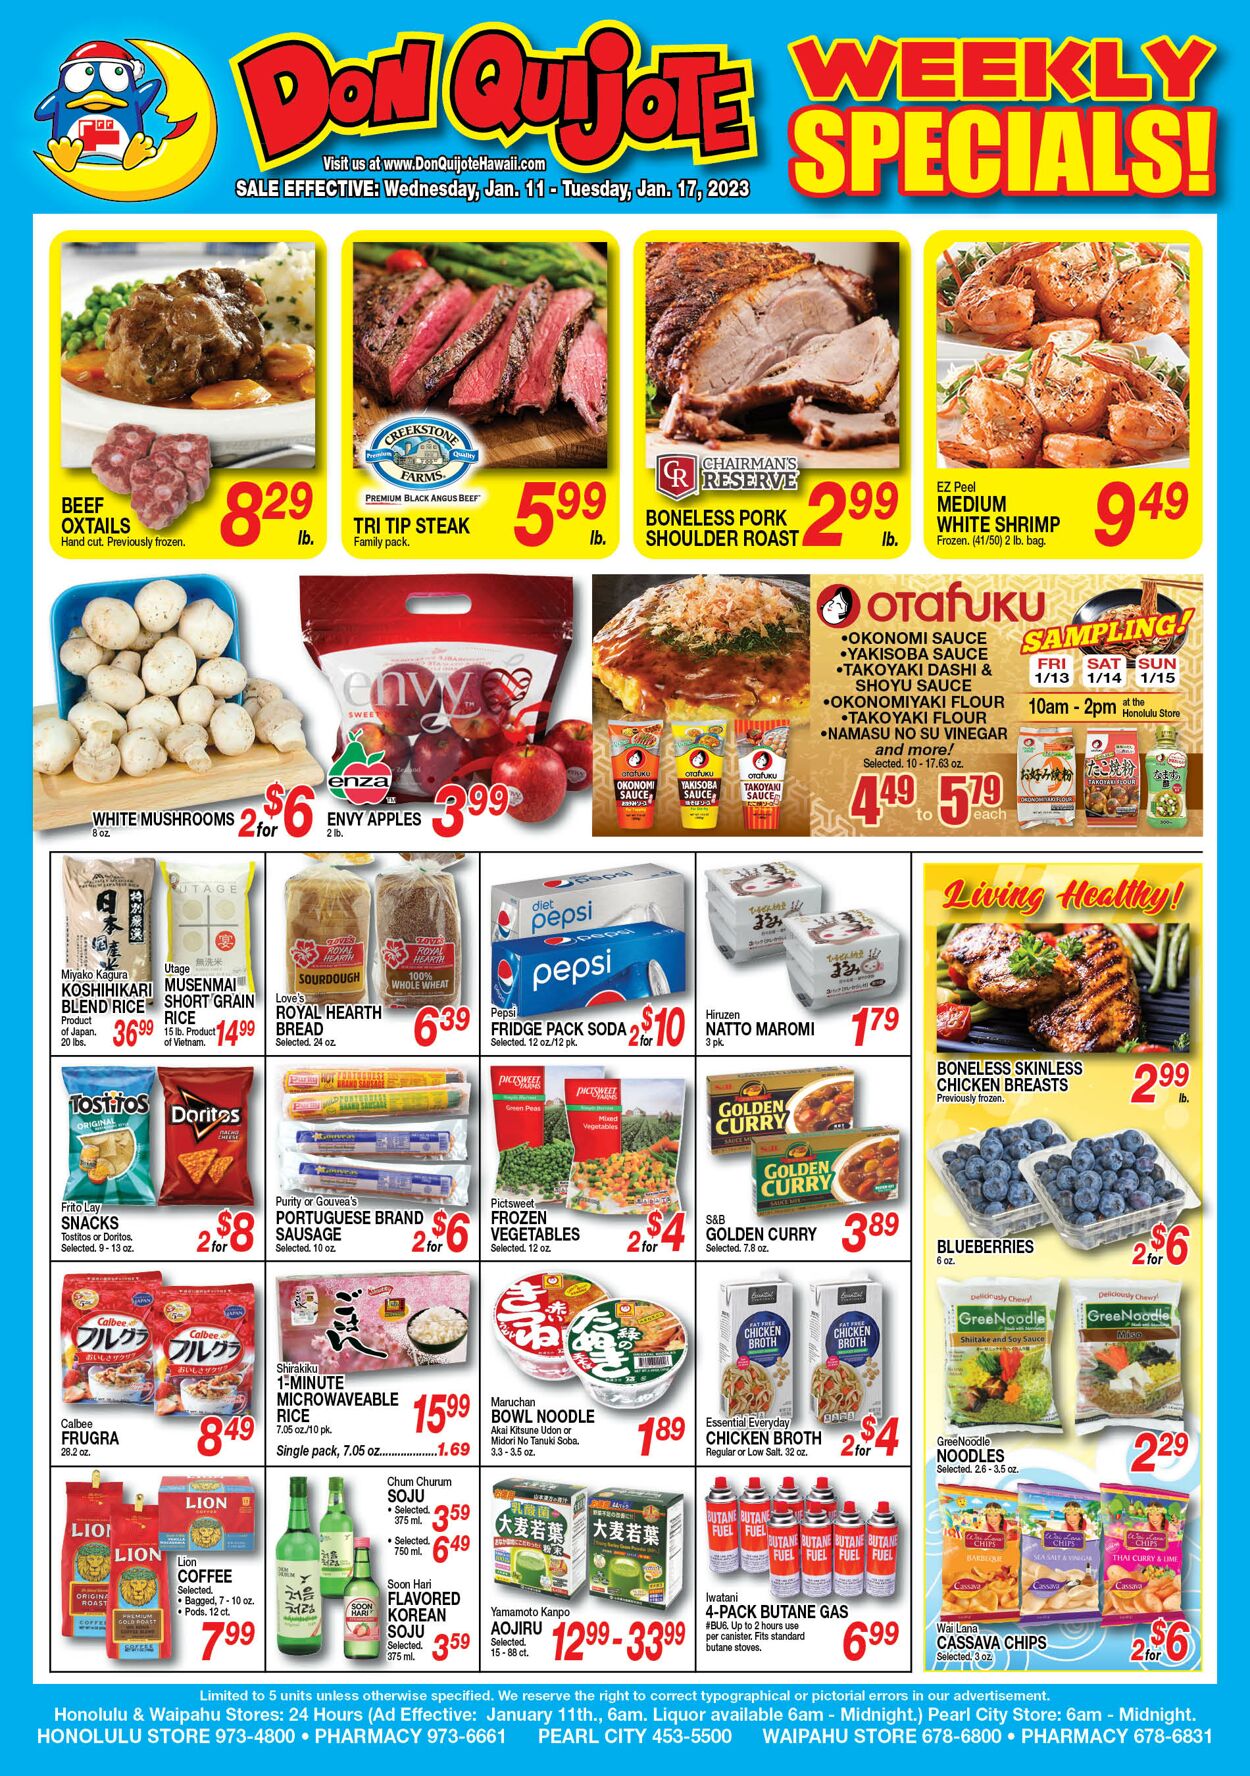 Don Quijote Hawaii Ad from 01/11/2023